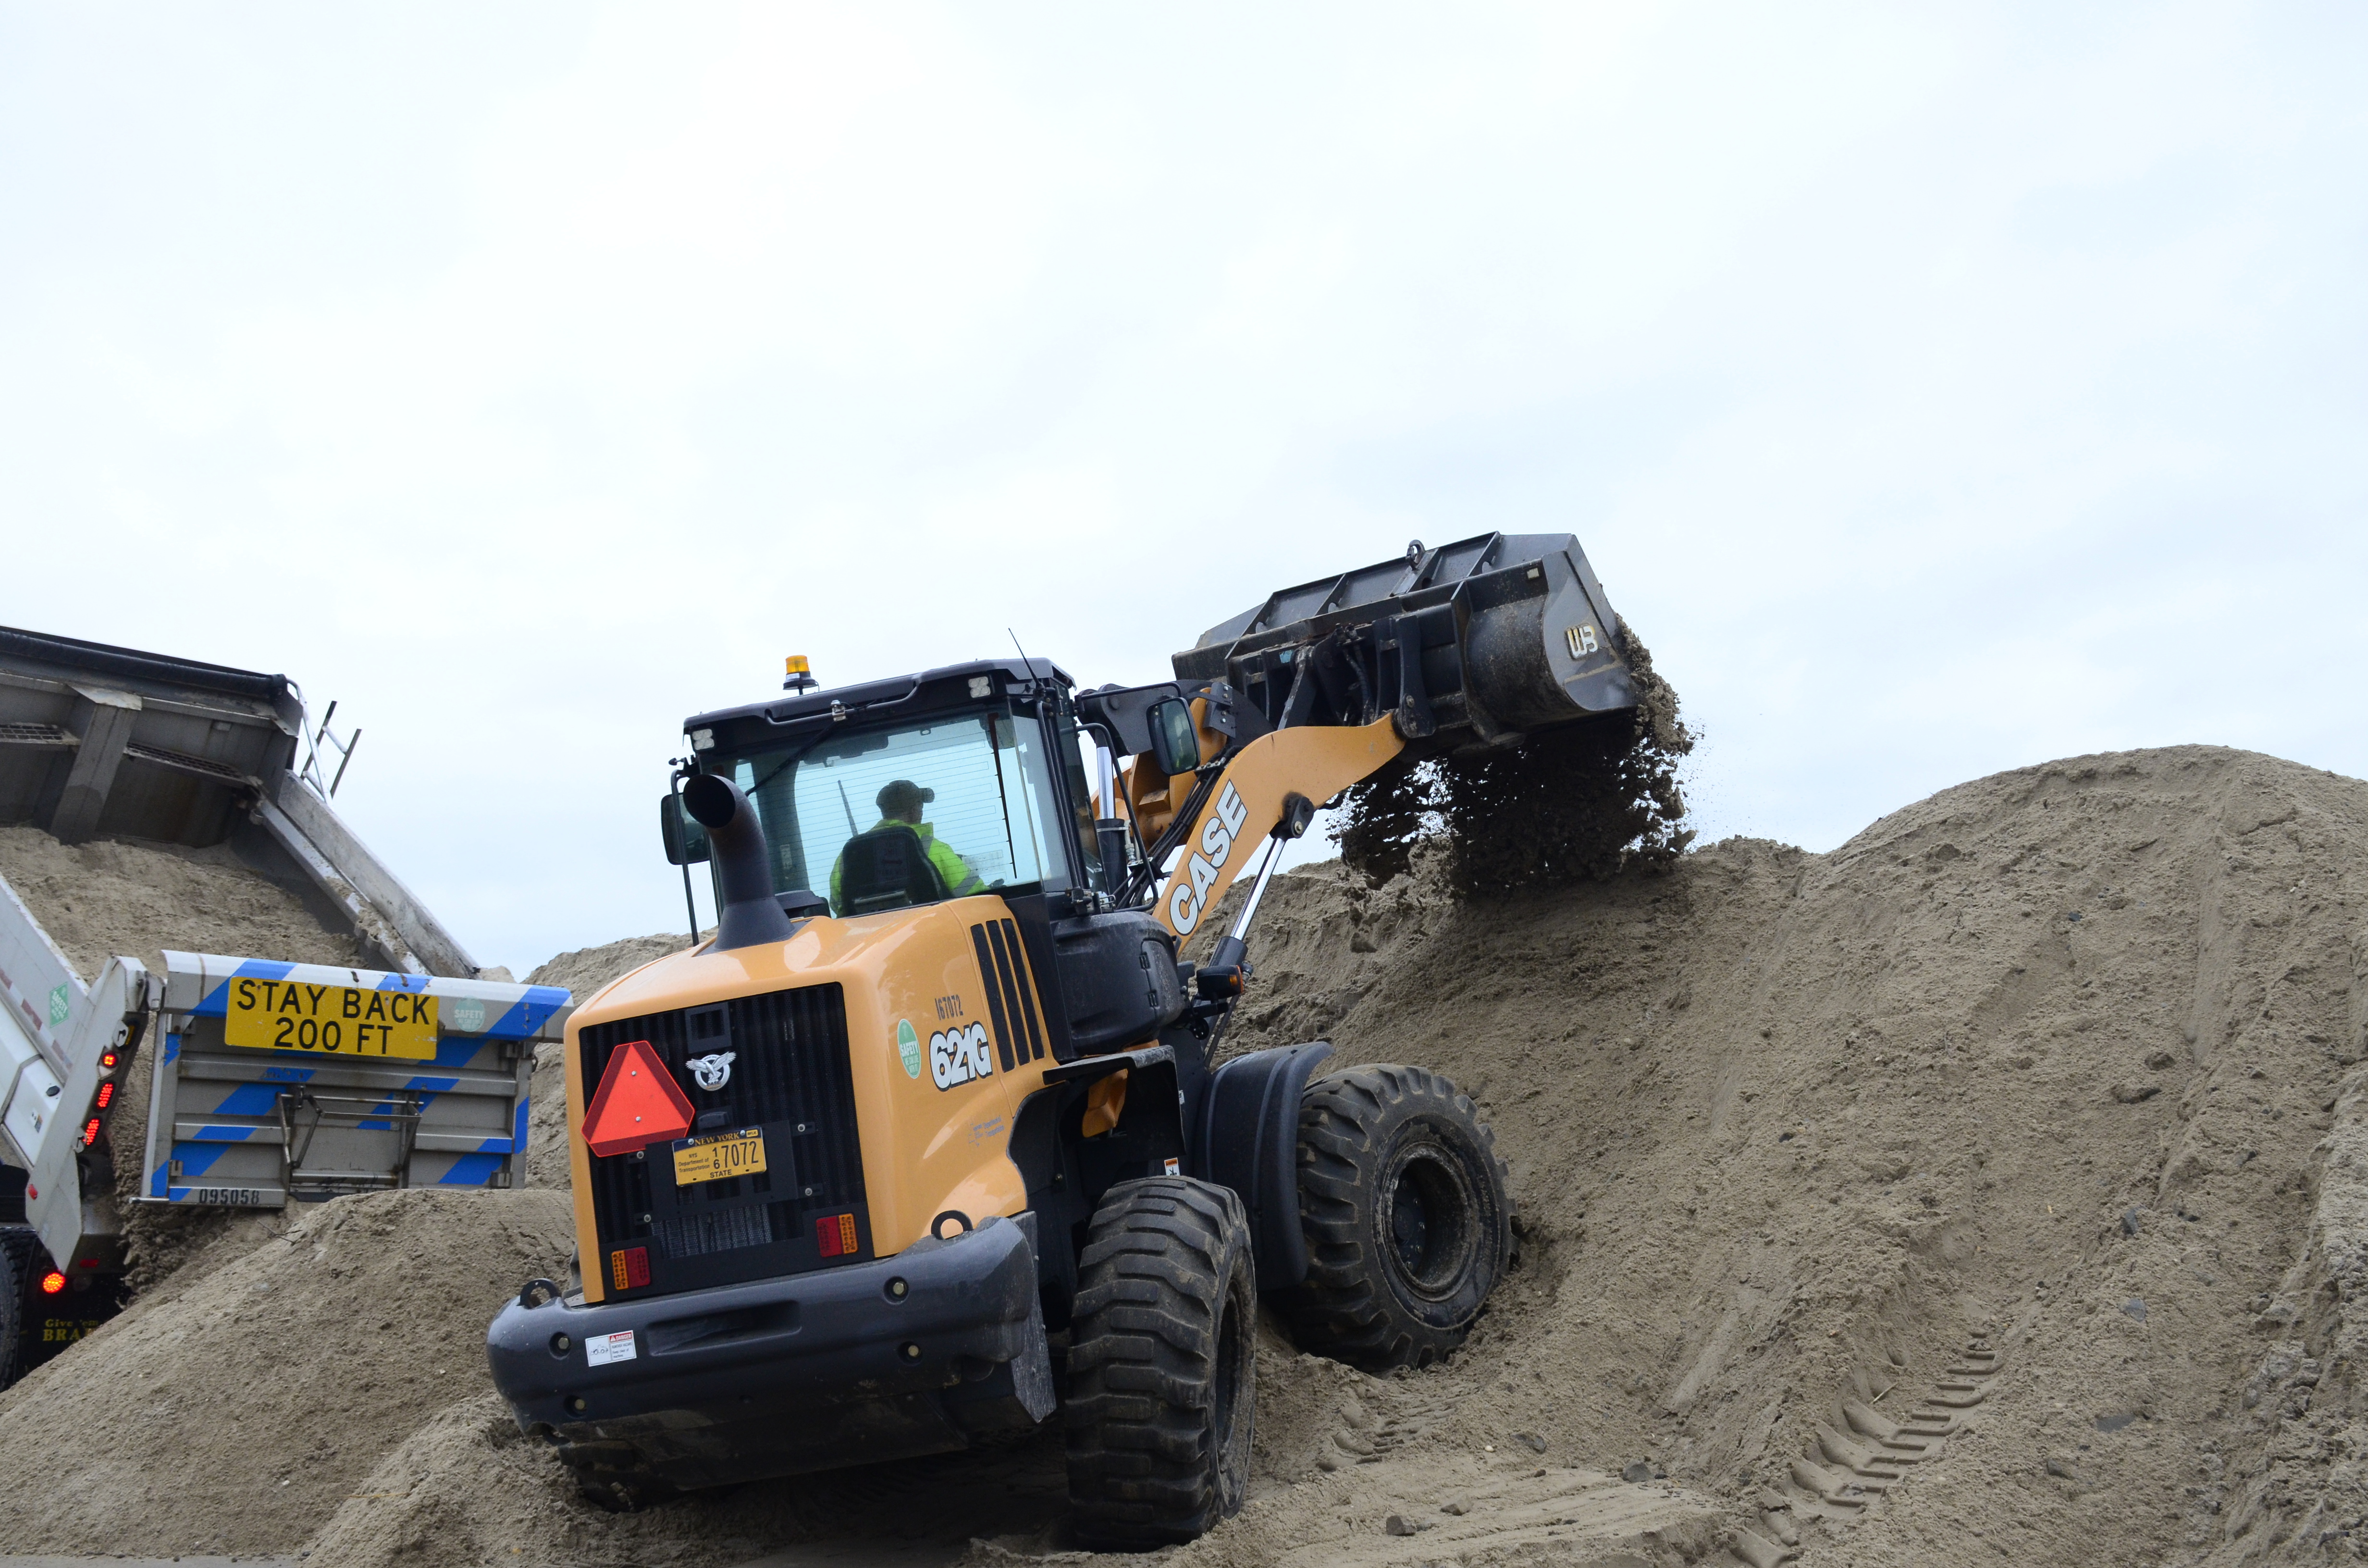 County and state crews helped rebuild a nearly 100-yard dune that was breached during a nor'easter on Thursday night. GREG WEHNER